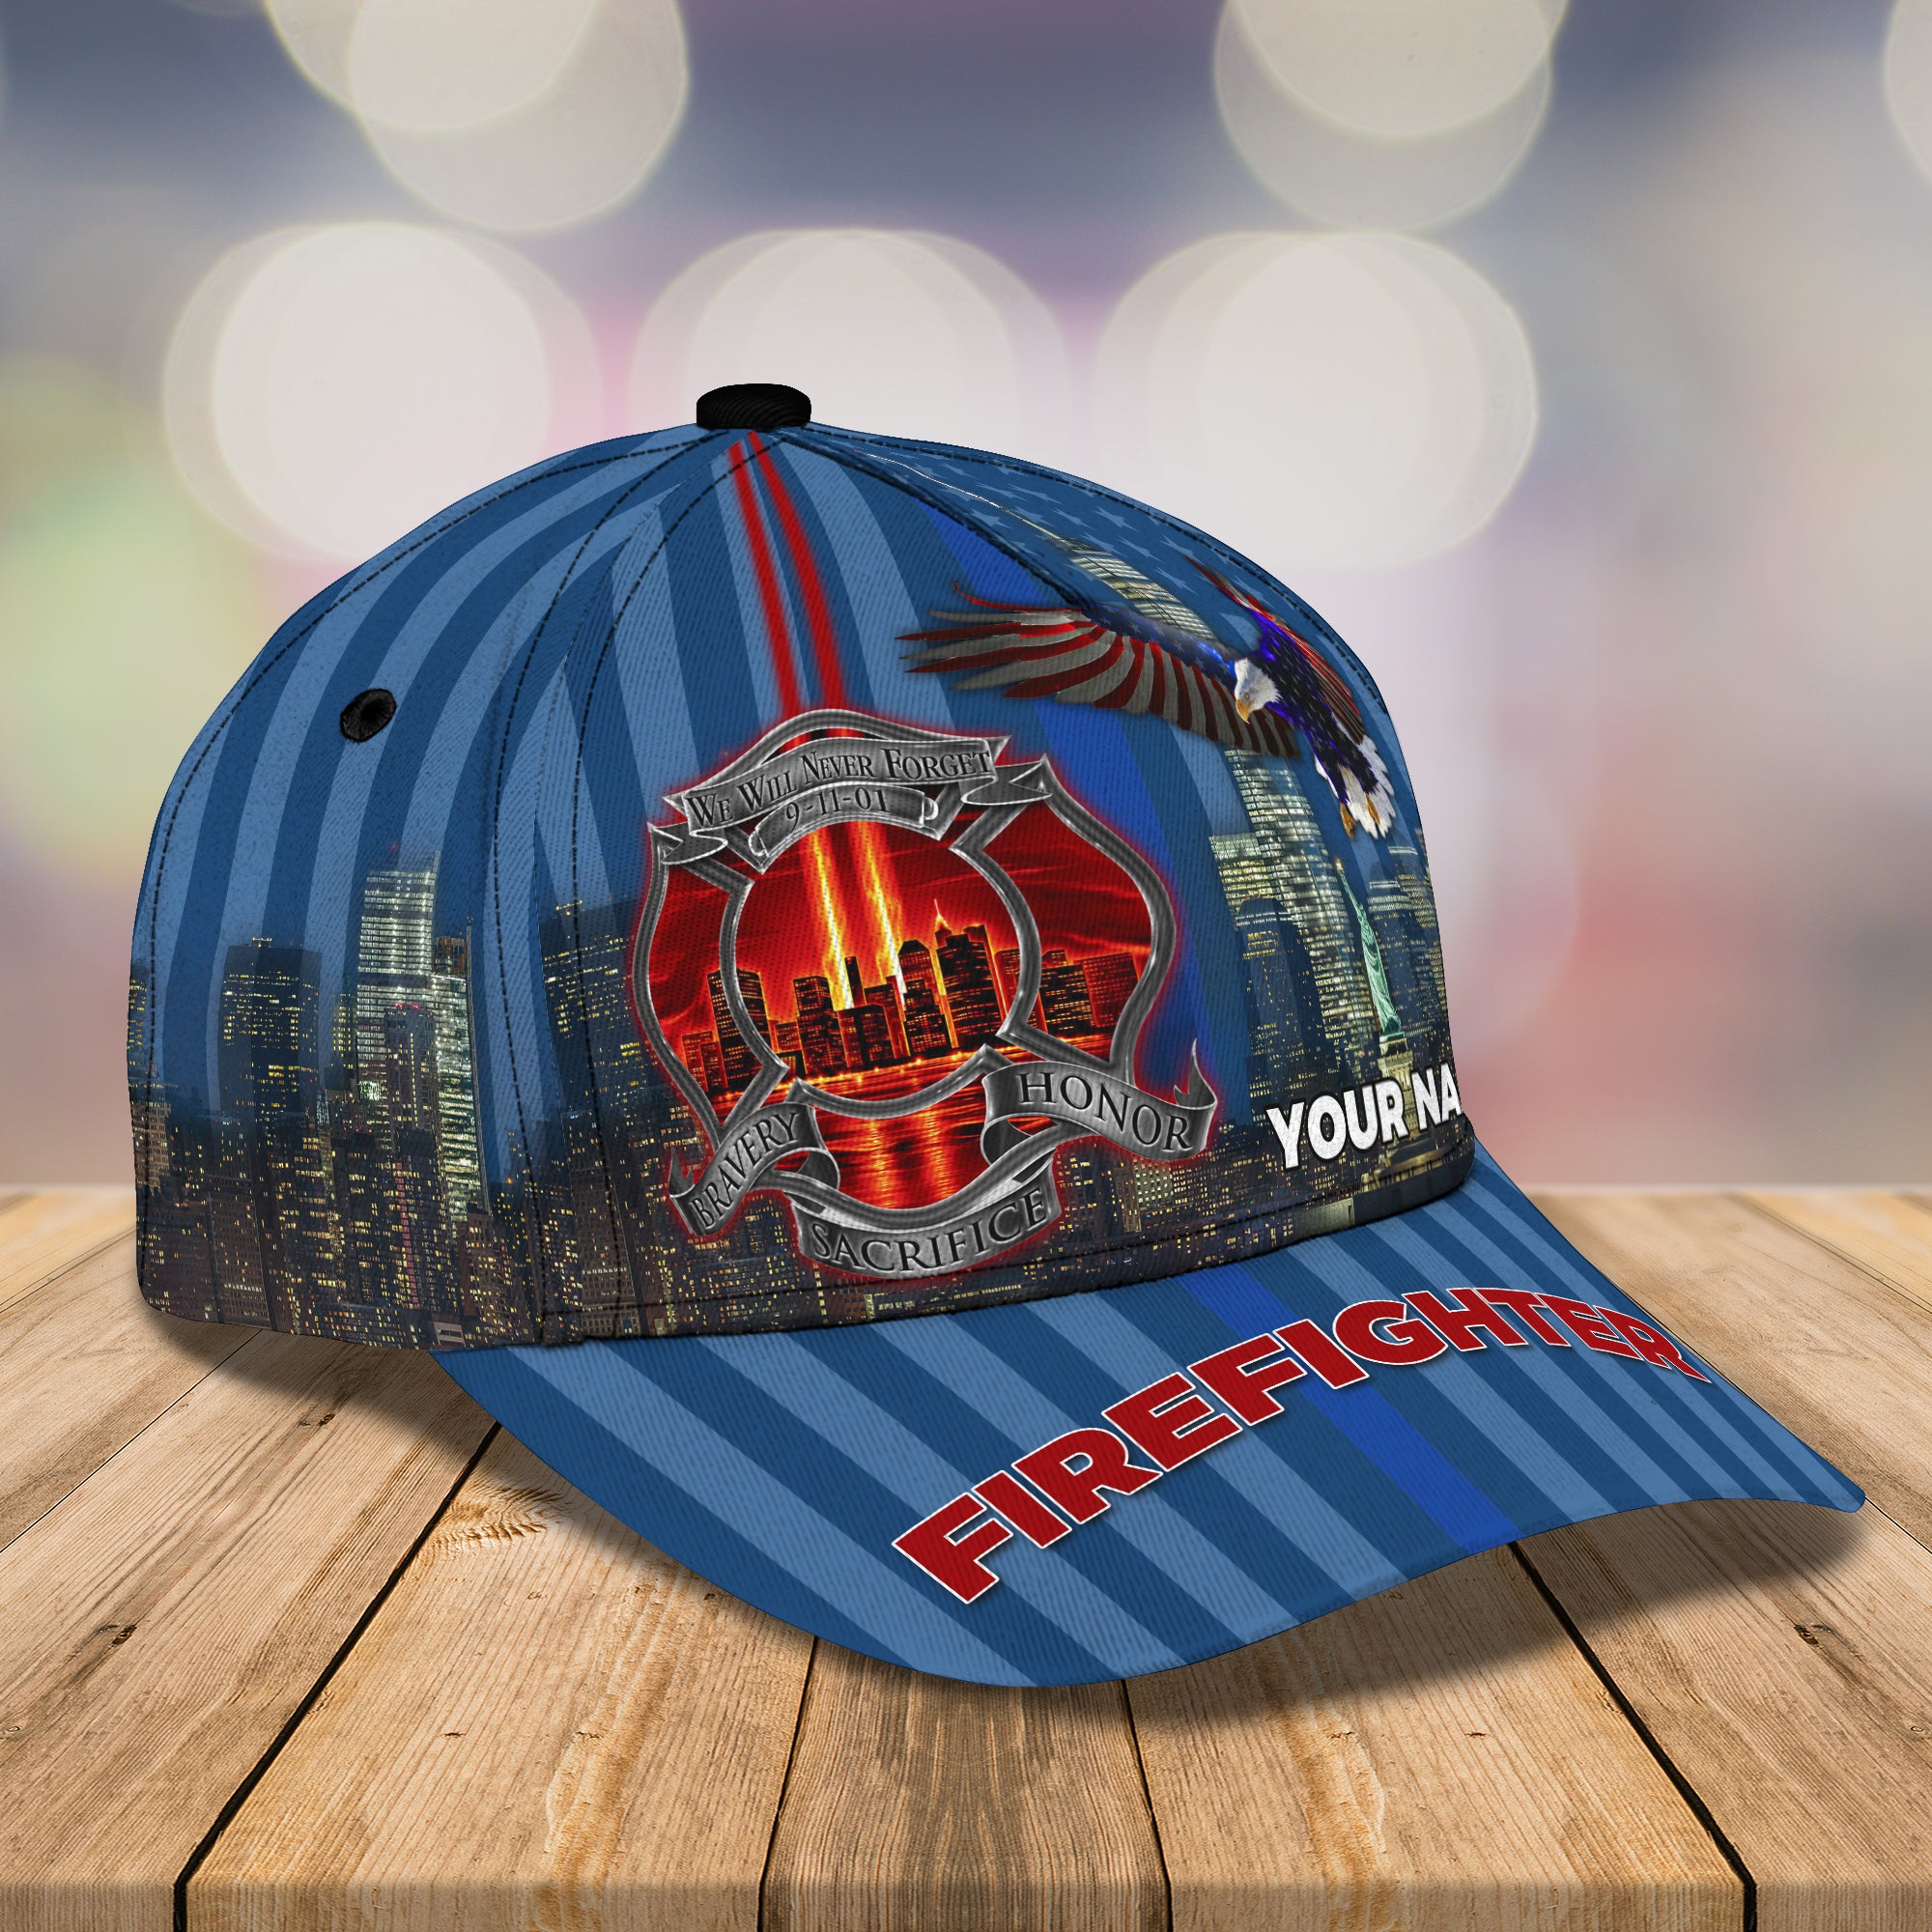 Firefighter 03 - Personalize Name Cap  - Loop - Ntp-266